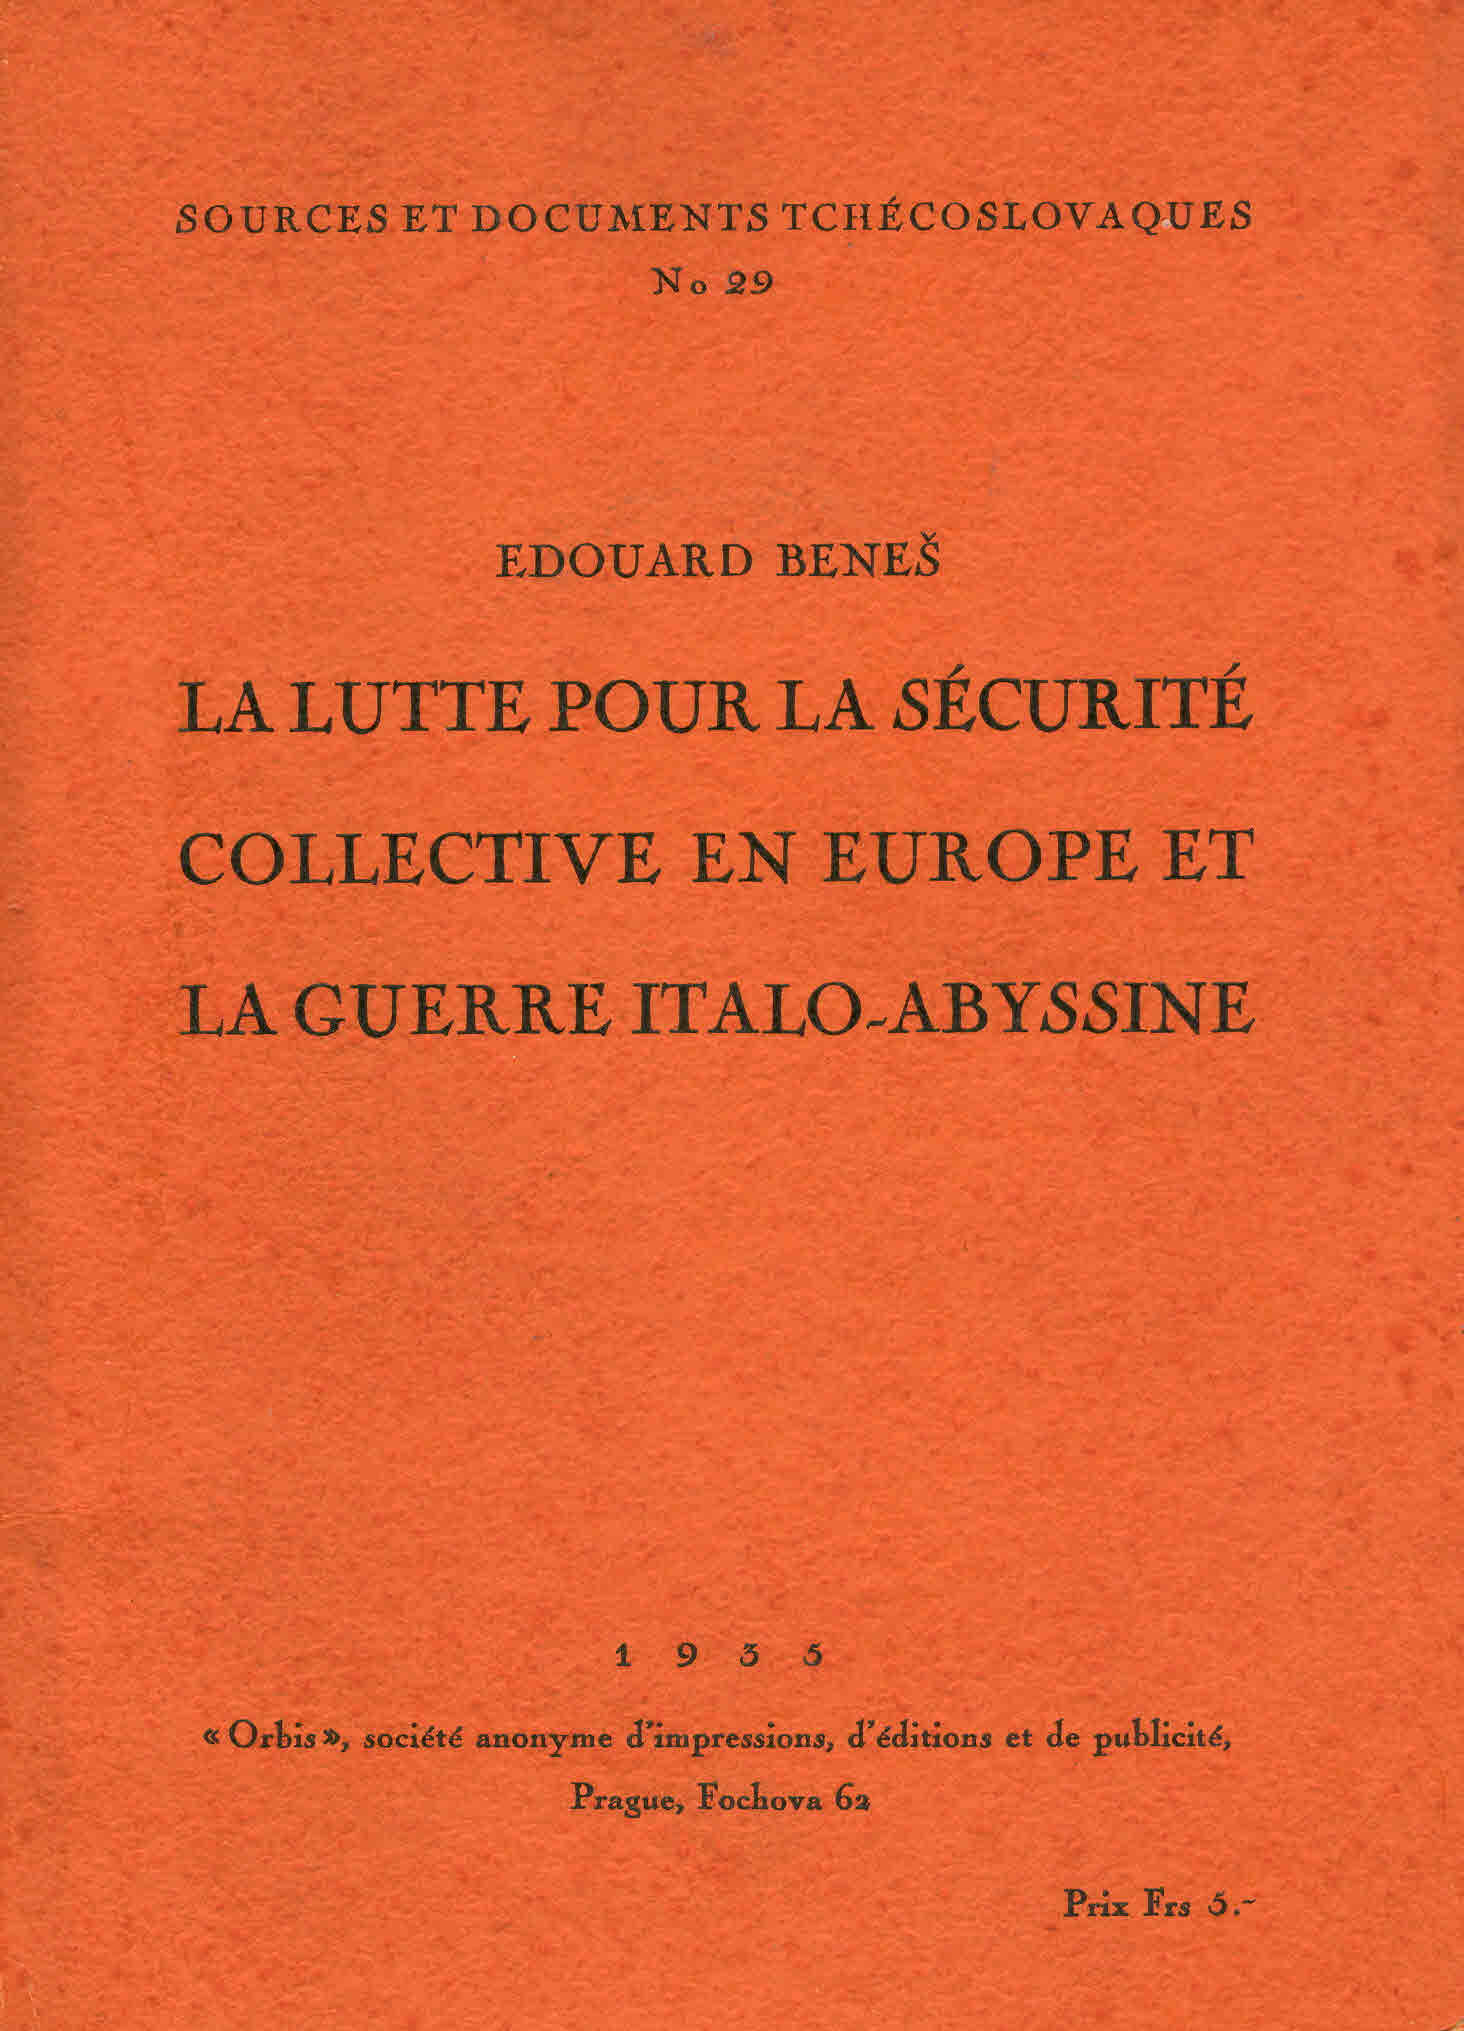 The Fight for Collective Security in Europe and the Italo-Abyssinian War